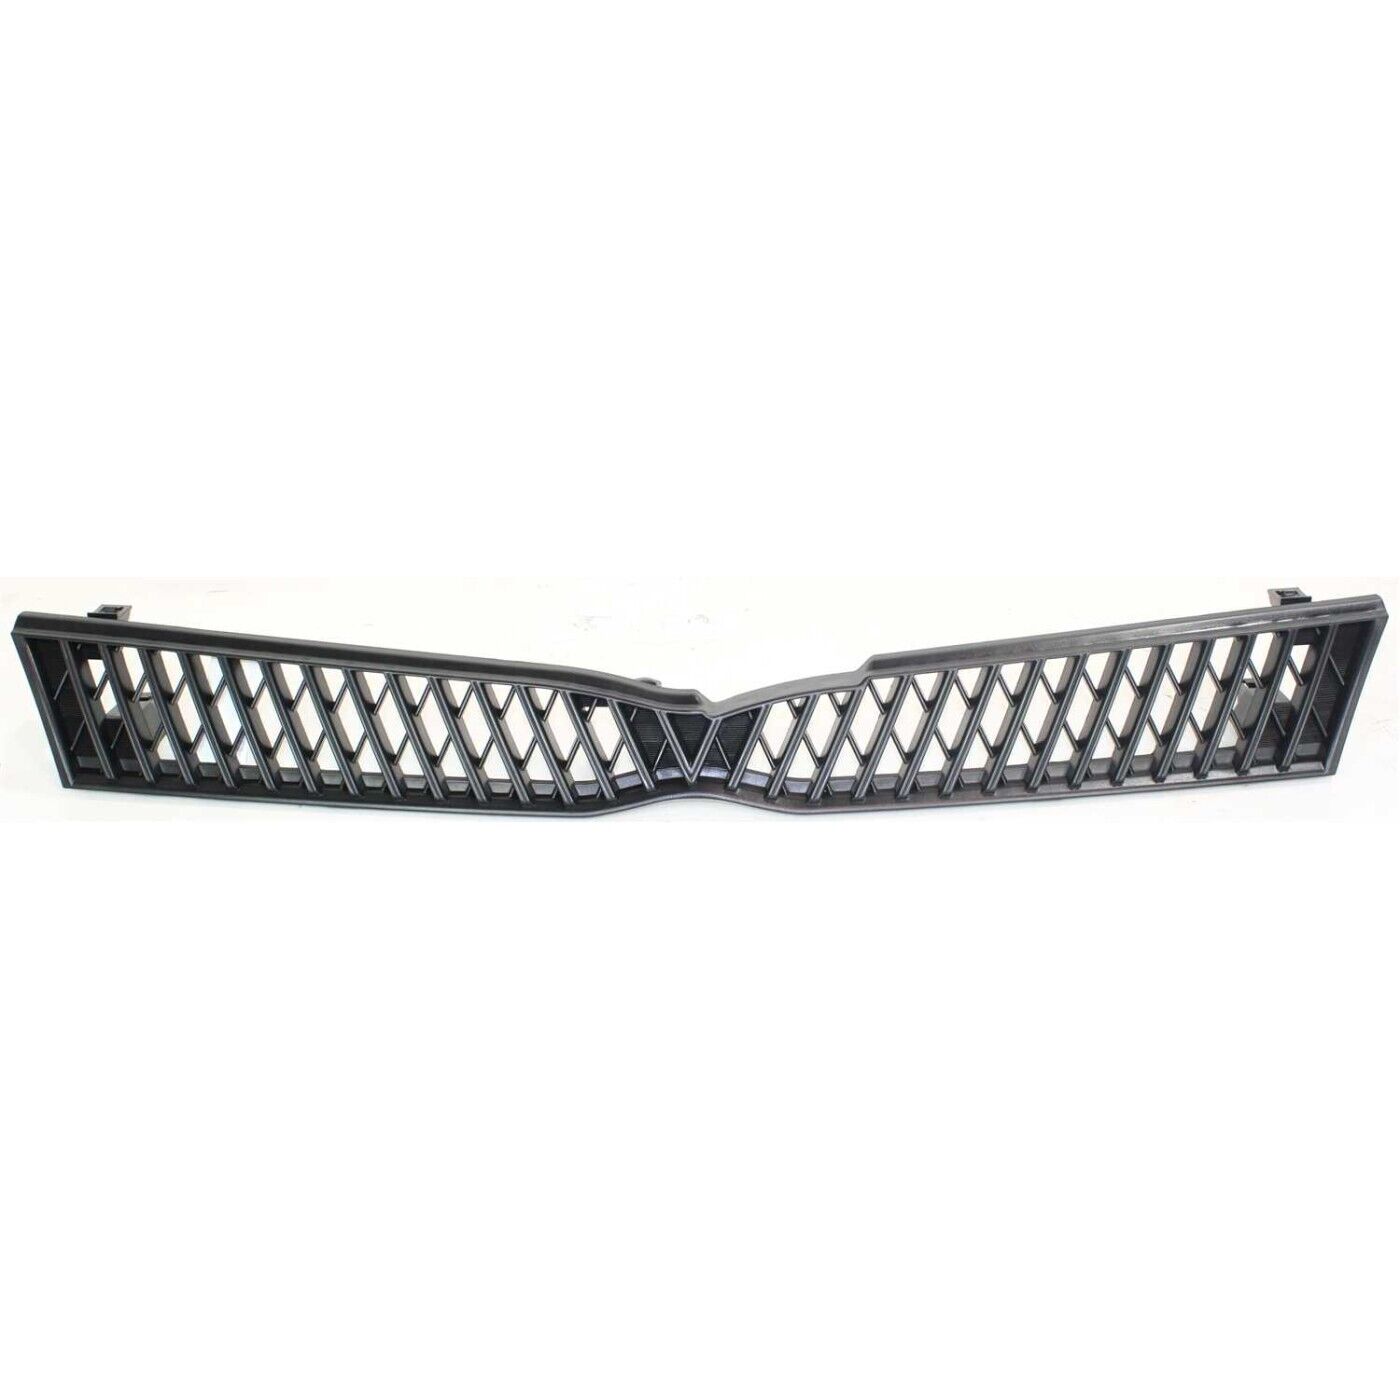 Grille For 2000-2002 Toyota Echo Textured Black Plastic